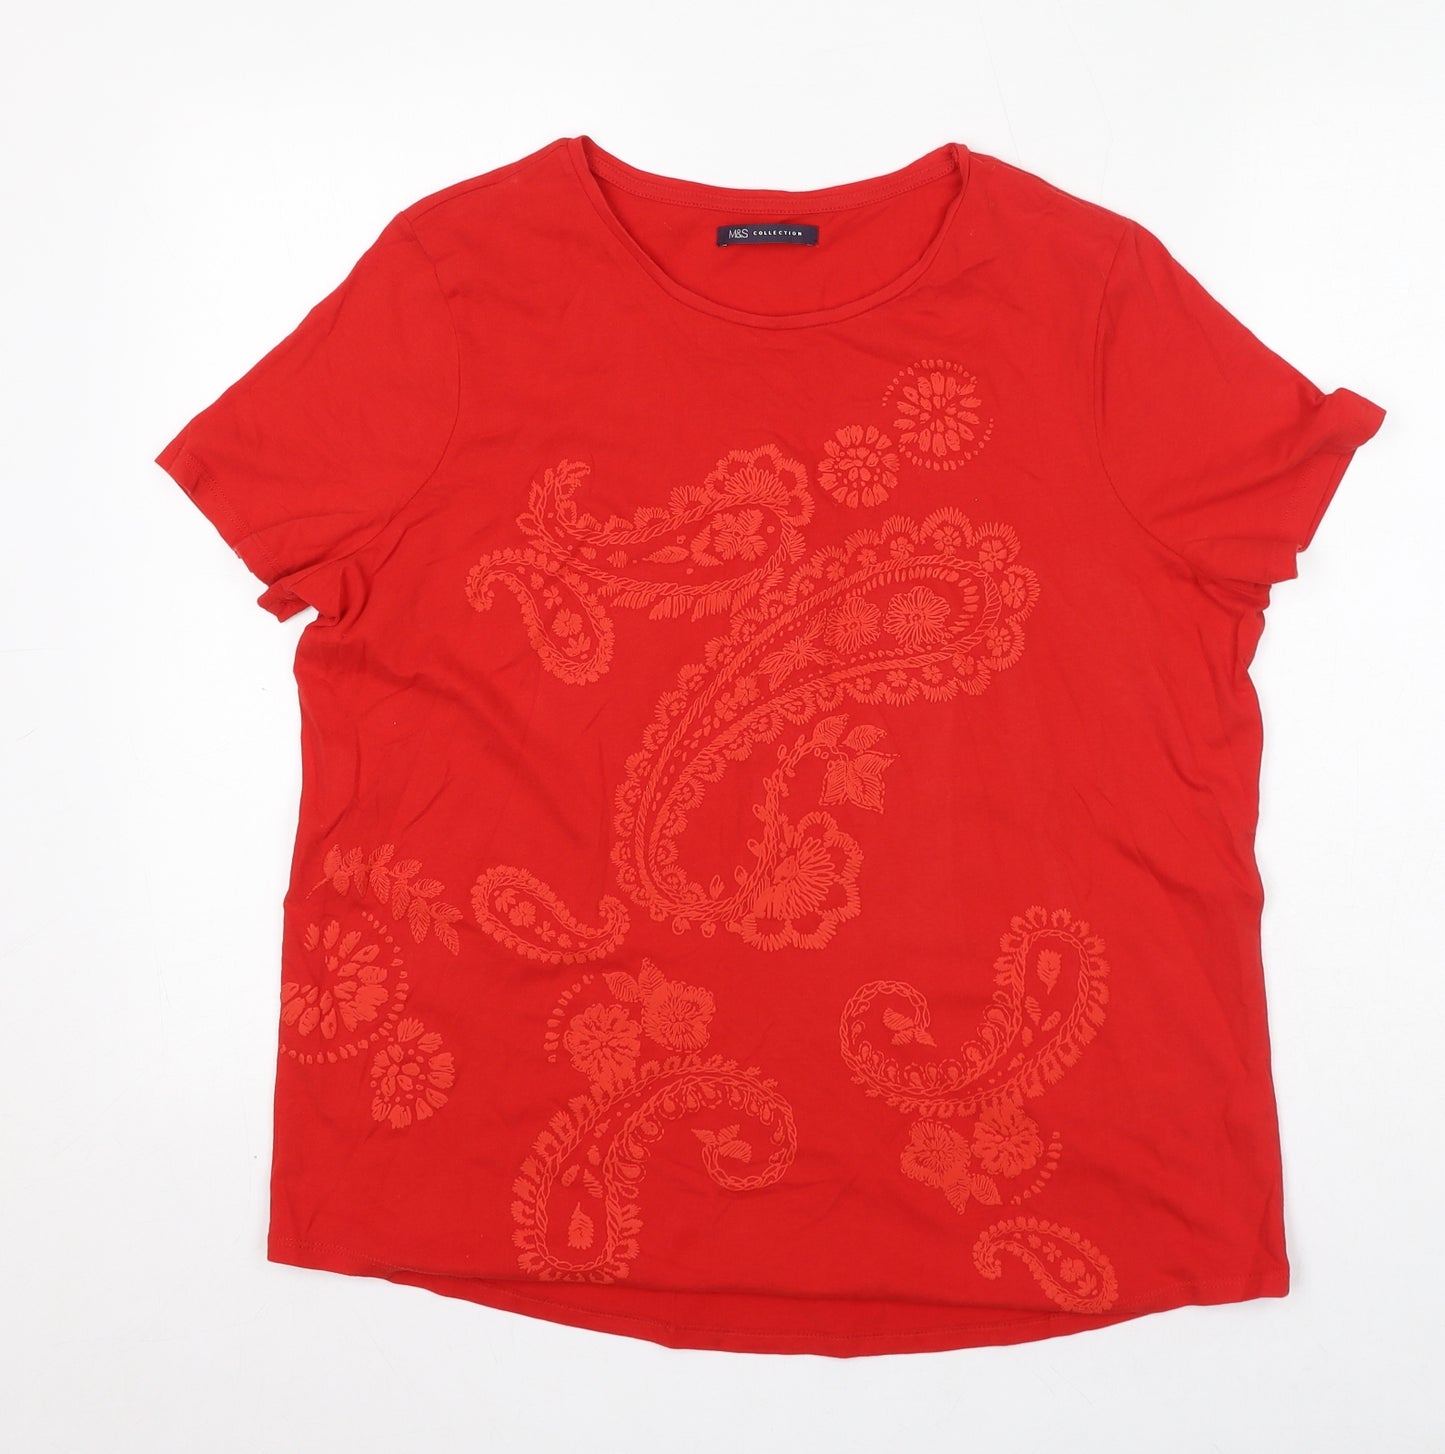 Marks and Spencer Womens Red Paisley 100% Cotton Basic T-Shirt Size 16 Round Neck